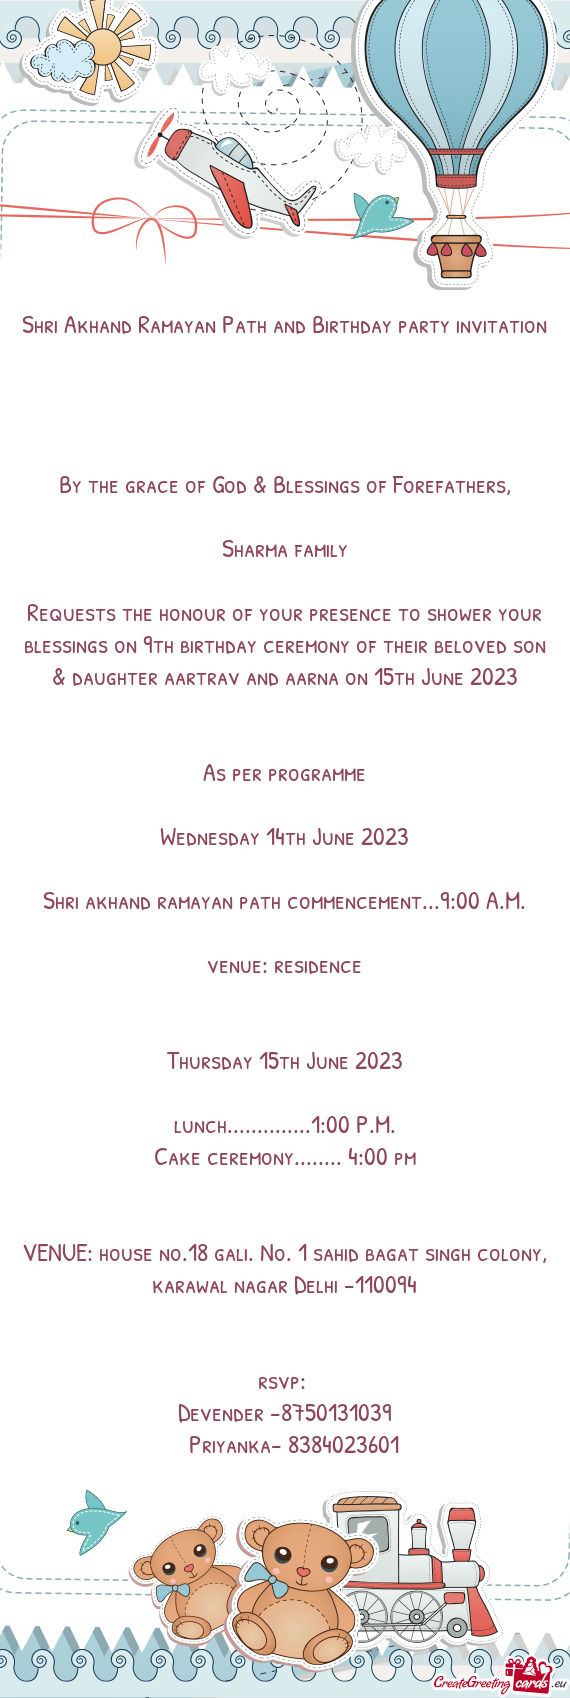 Requests the honour of your presence to shower your blessings on 9th birthday ceremony of their belo